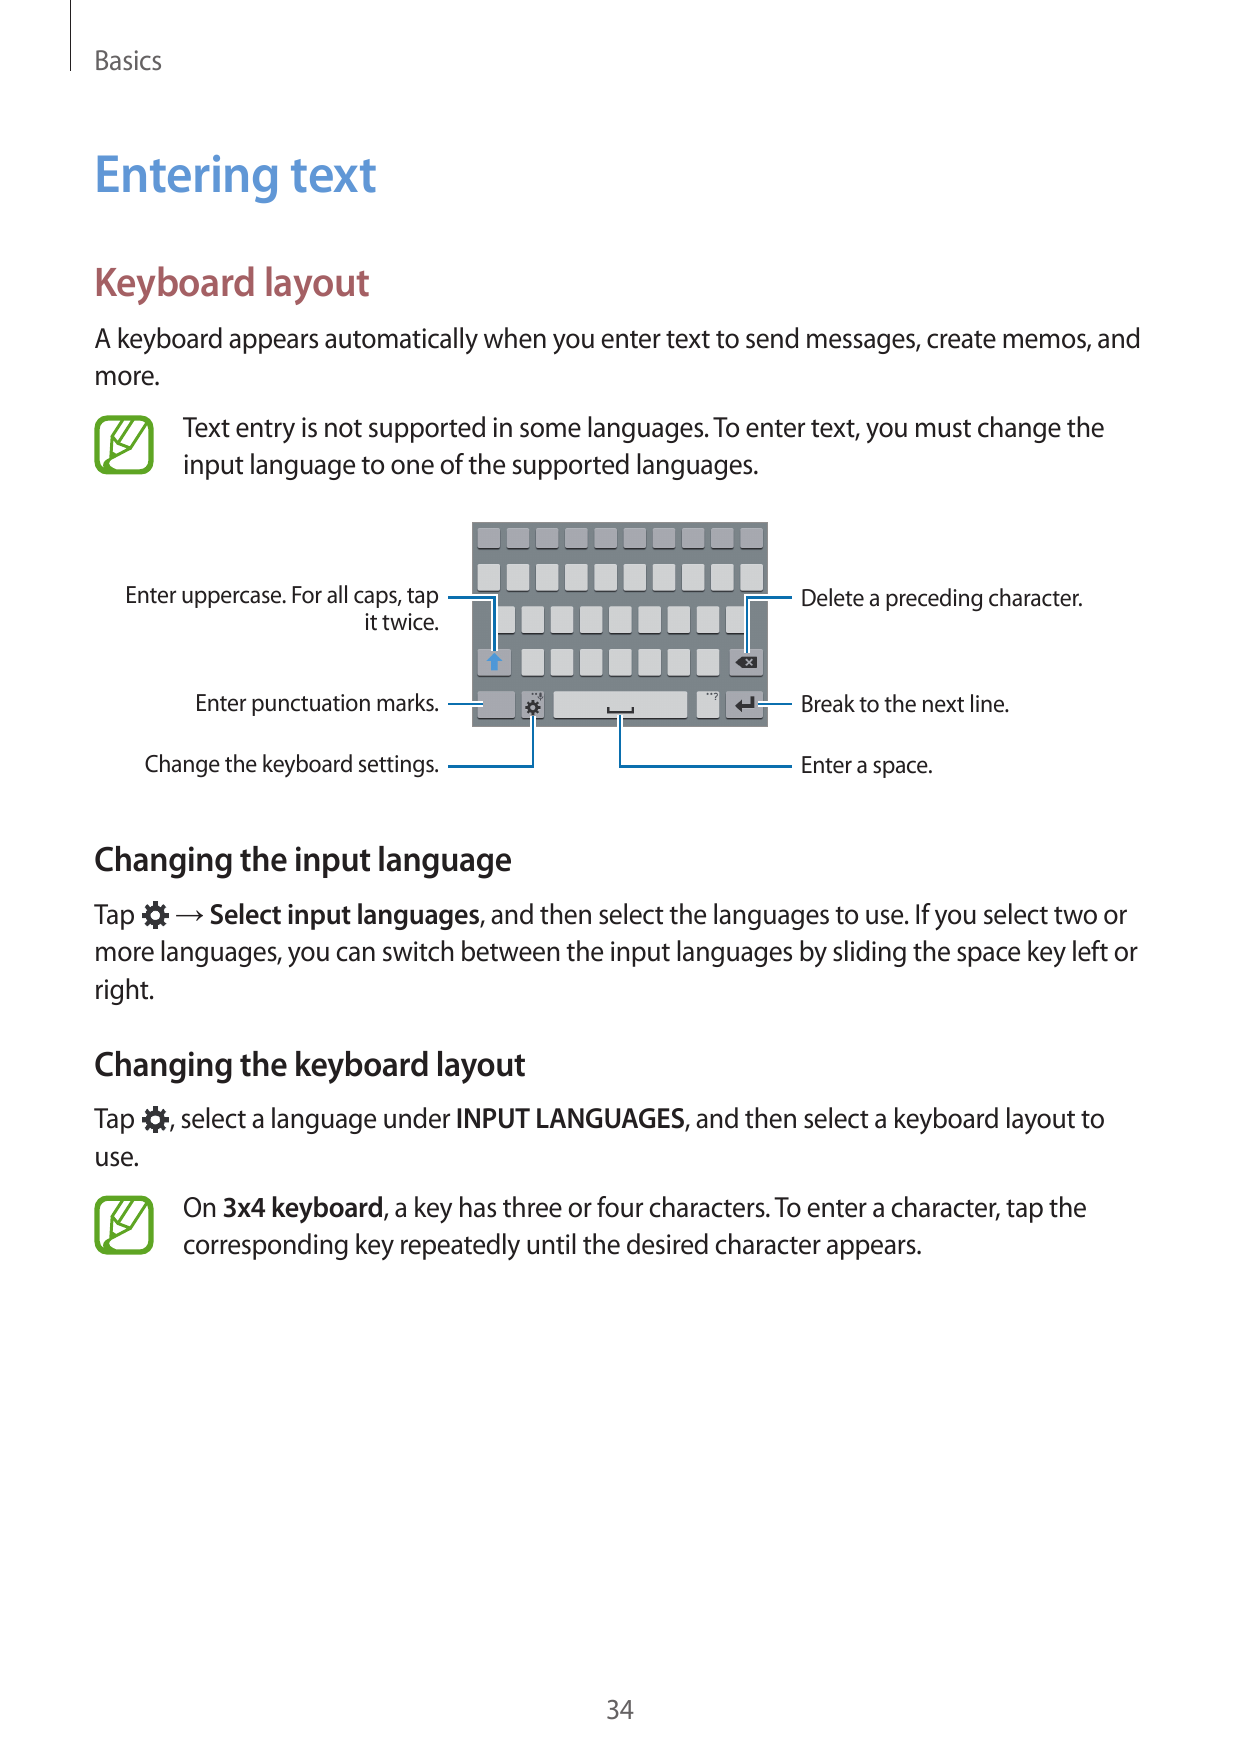 BasicsEntering textKeyboard layoutA keyboard appears automatically when you enter text to send messages, create memos, andmore.T